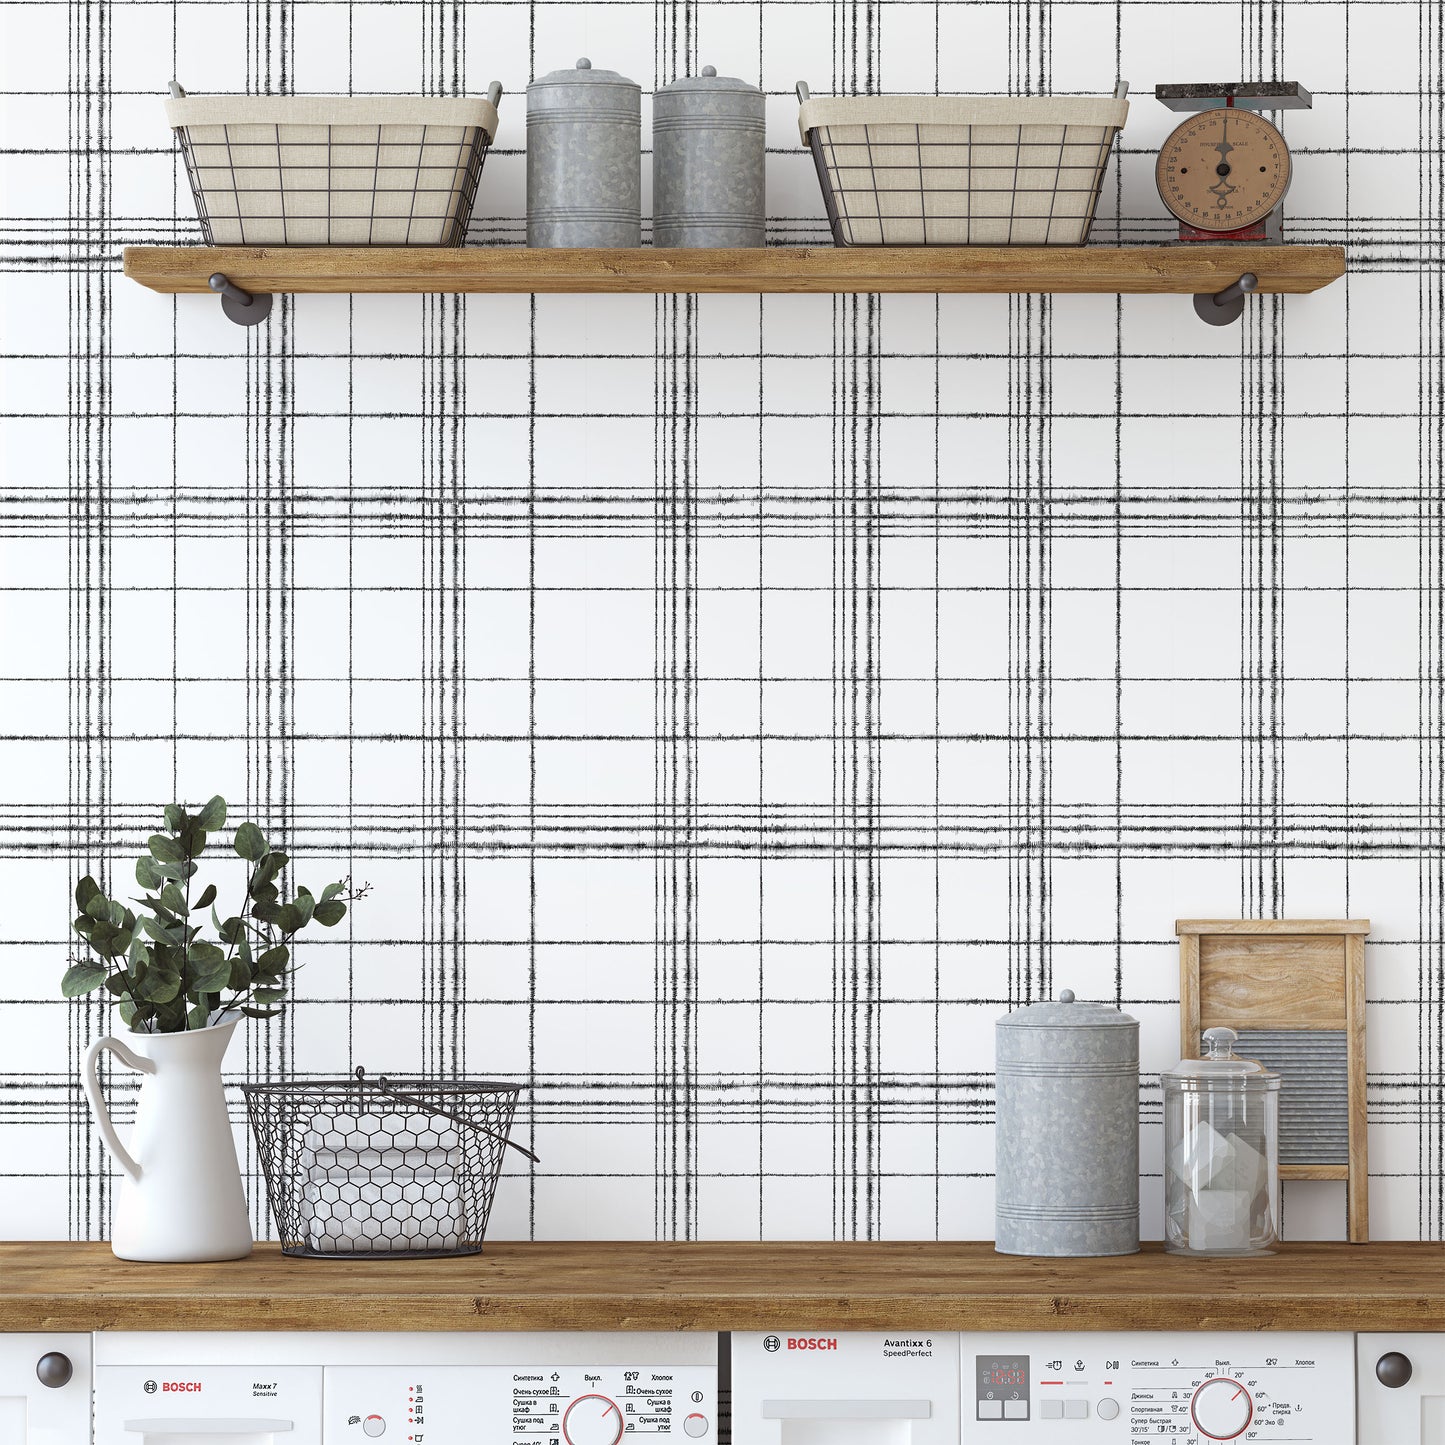 Trendy textured black plaid print on white background easy to install and remove peel and stick custom wallpaper available in different lengths/sizes locally created and printed in Canada wallpaper. Washable, durable, commercial grade, removable and waterproof.